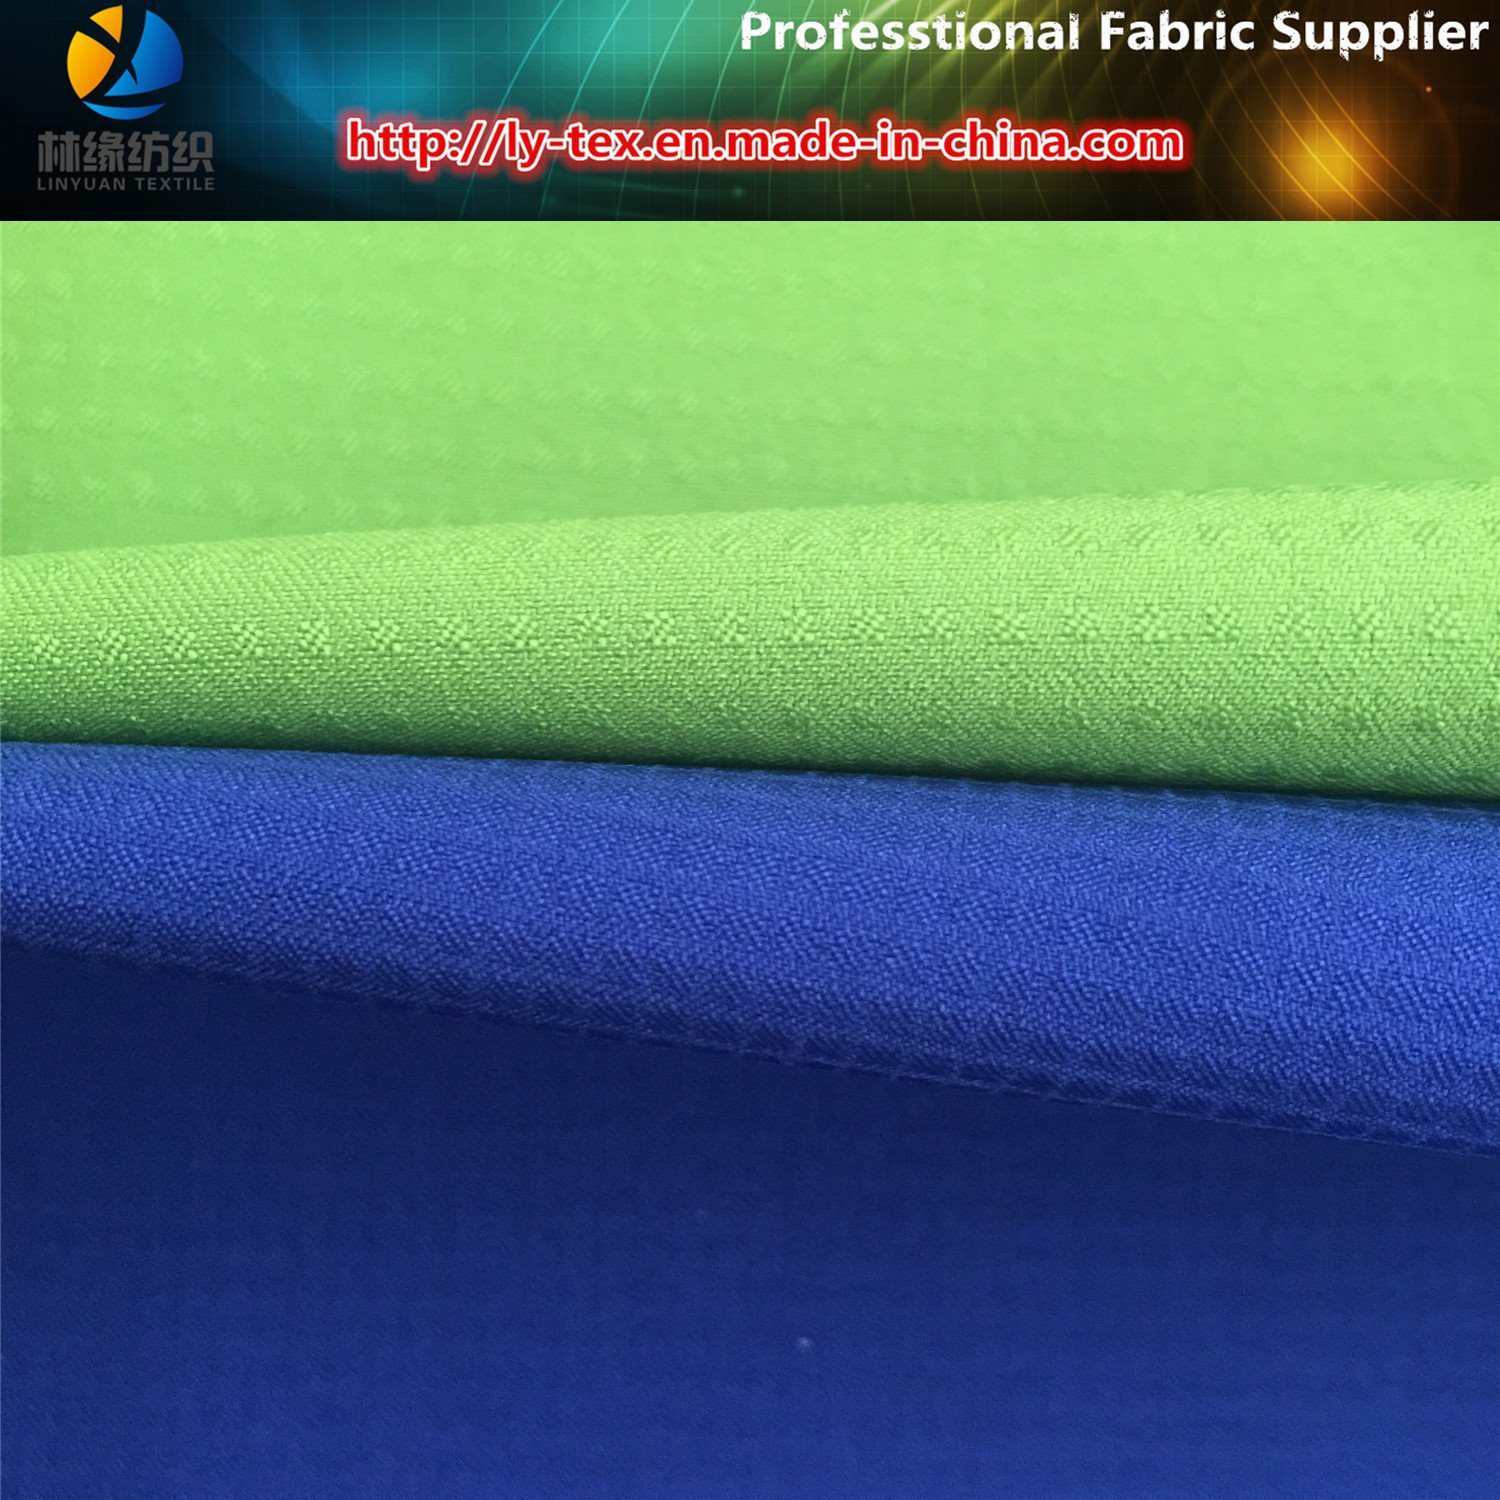 Polyester Elastic Dobby Textile Fabric with Wicking for Shirt (R0139)